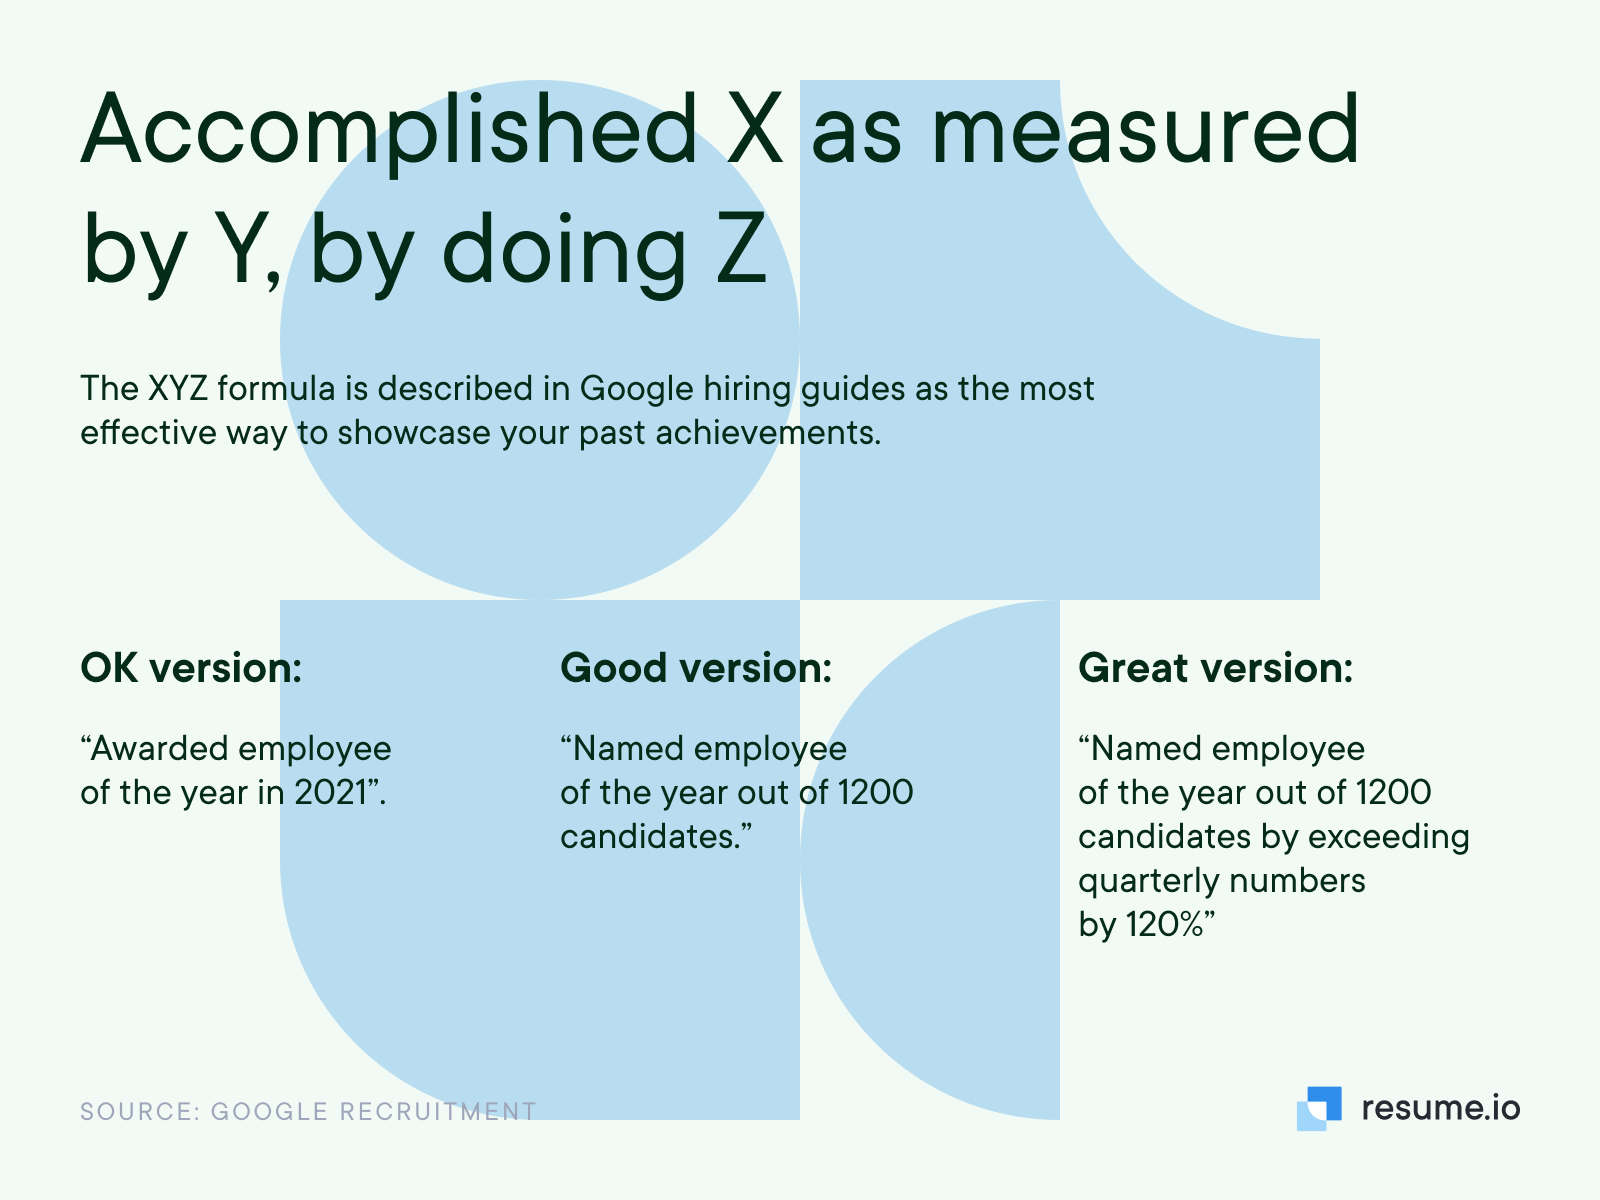 Accomplished X as measured by Y, by doing Z